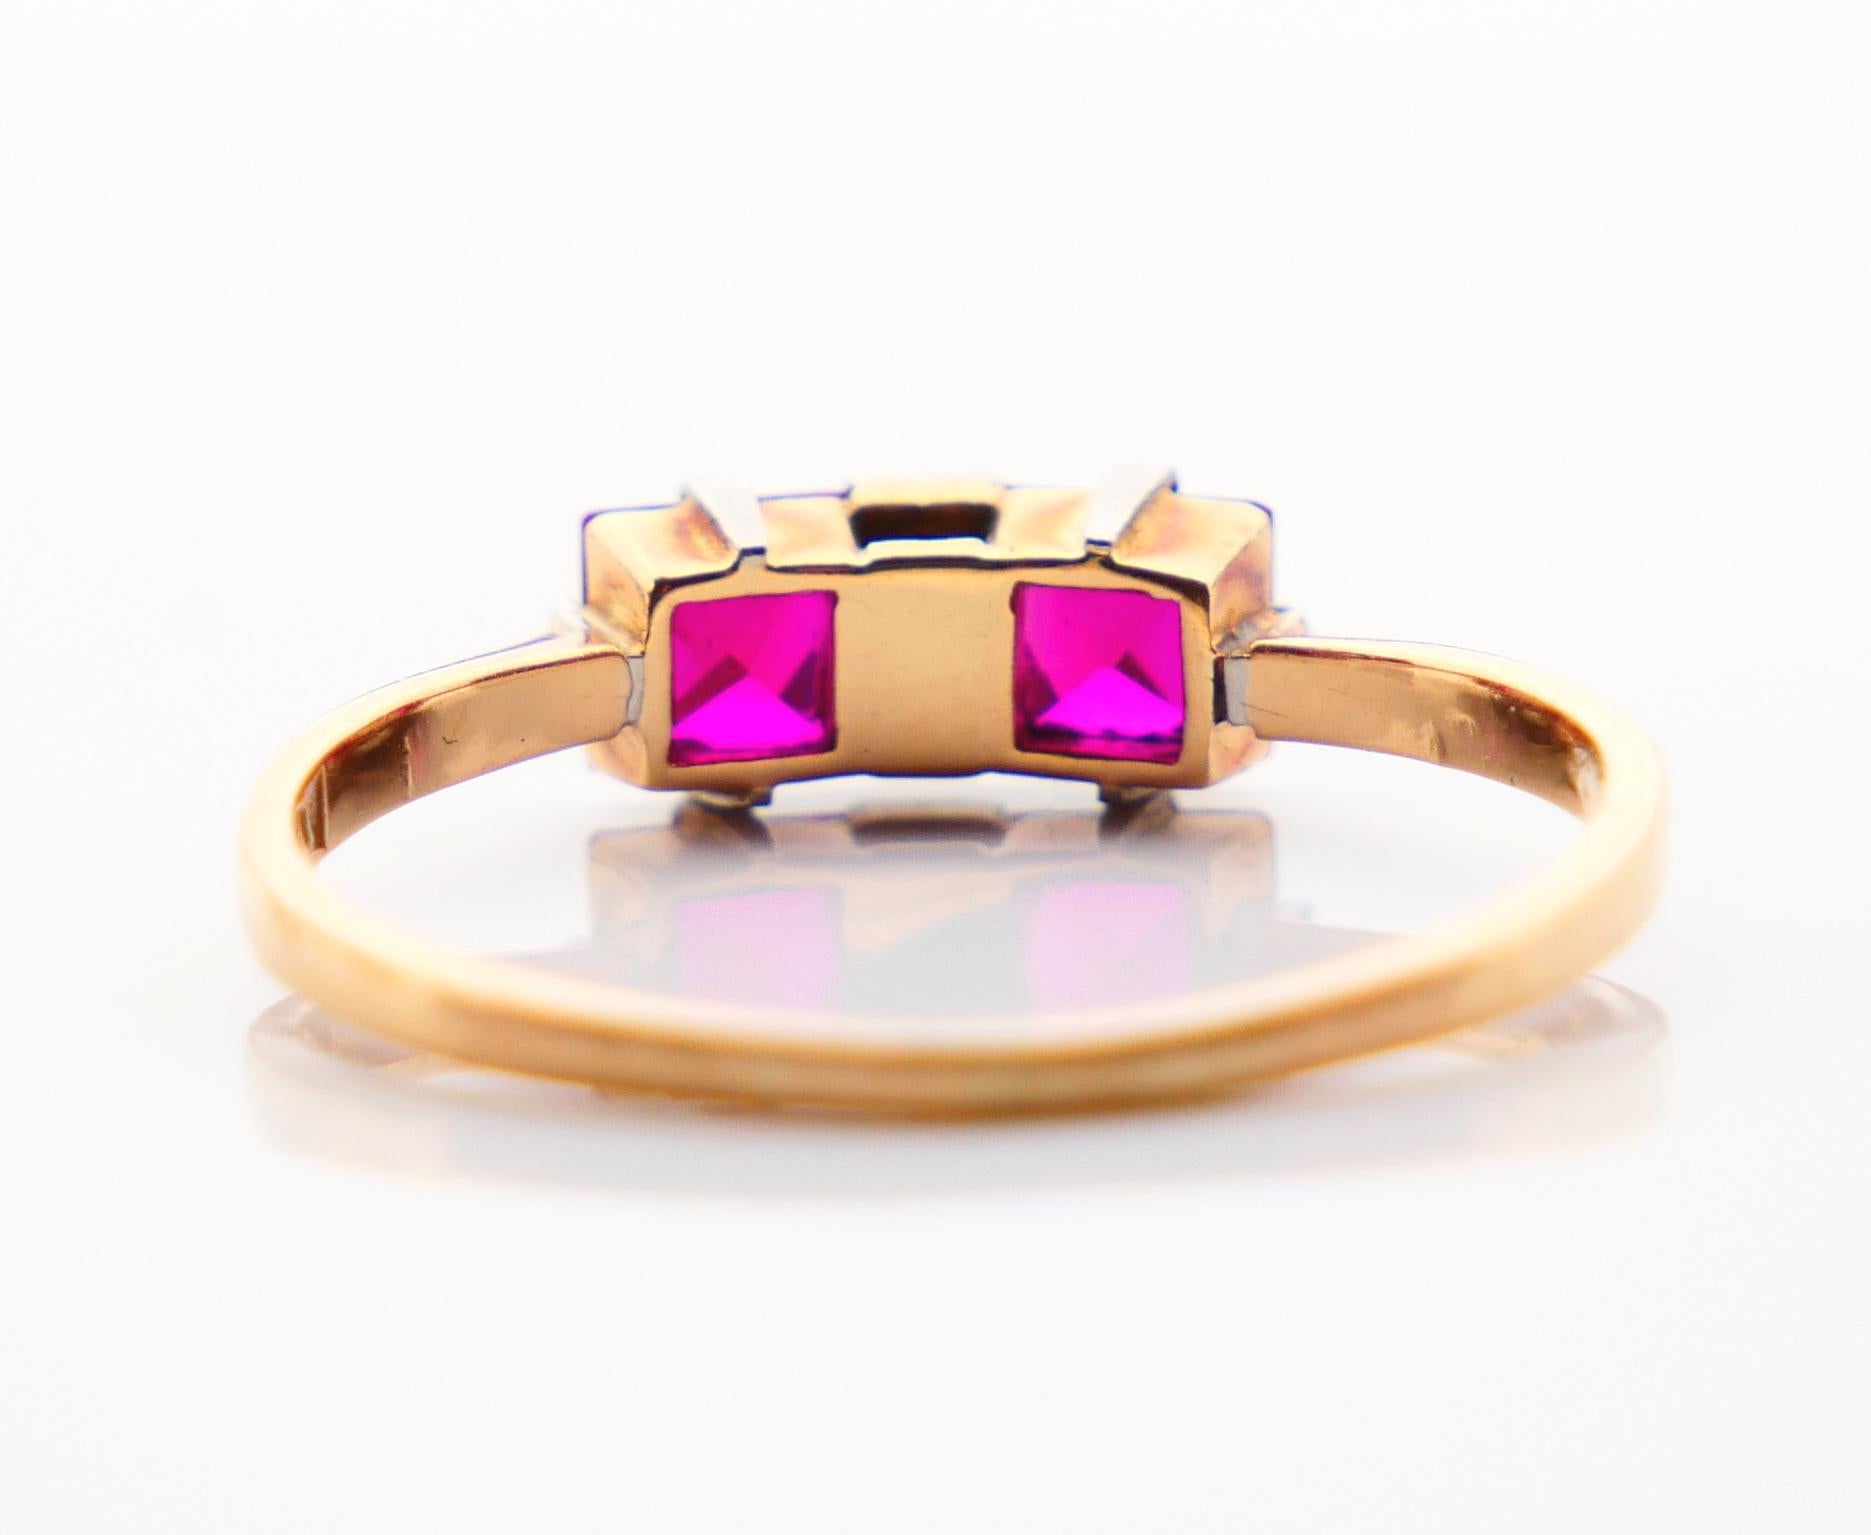 1940 Nordic 4 stones Ring Ruby Diamonds solid 18K Gold Platinum Ø US 7.75 / 1.8g For Sale 4